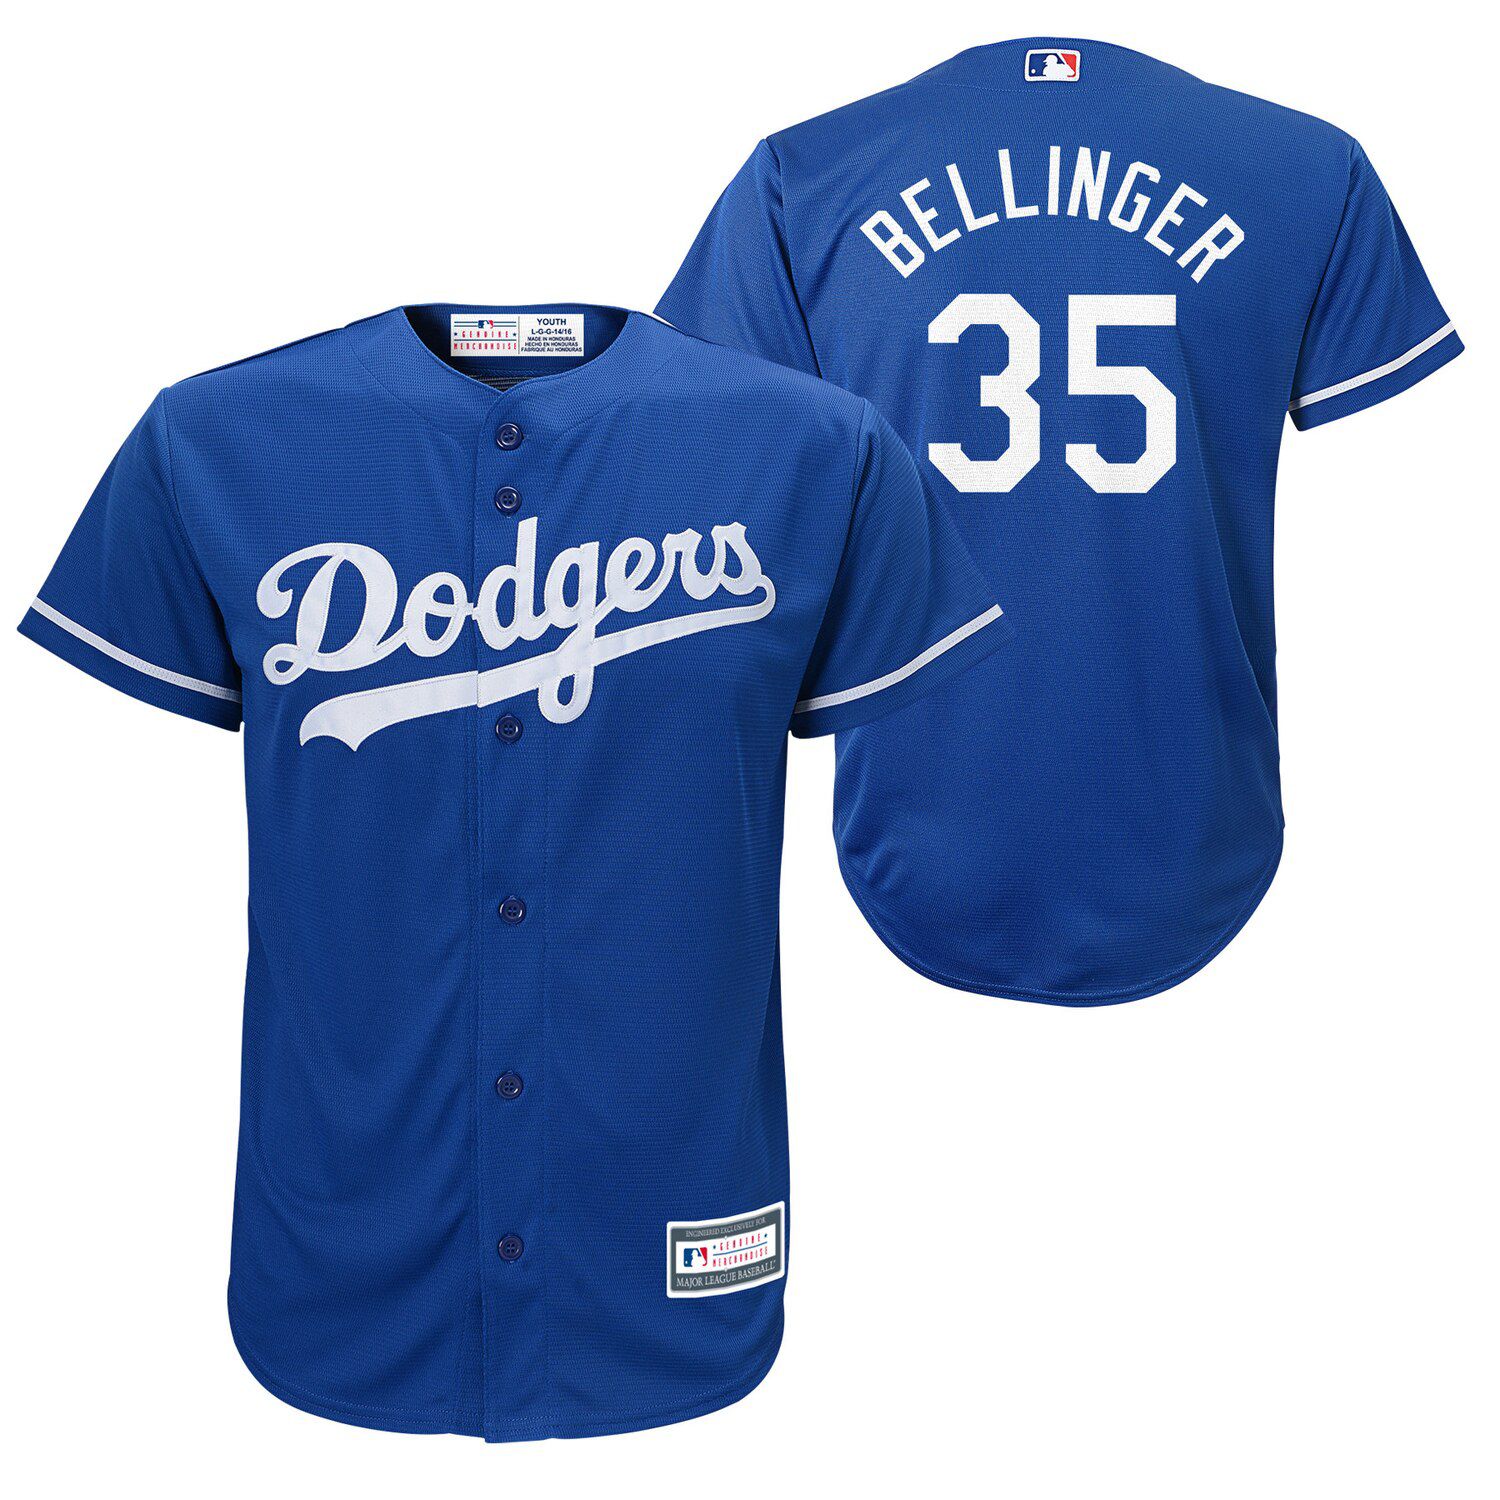 dodgers players jersey